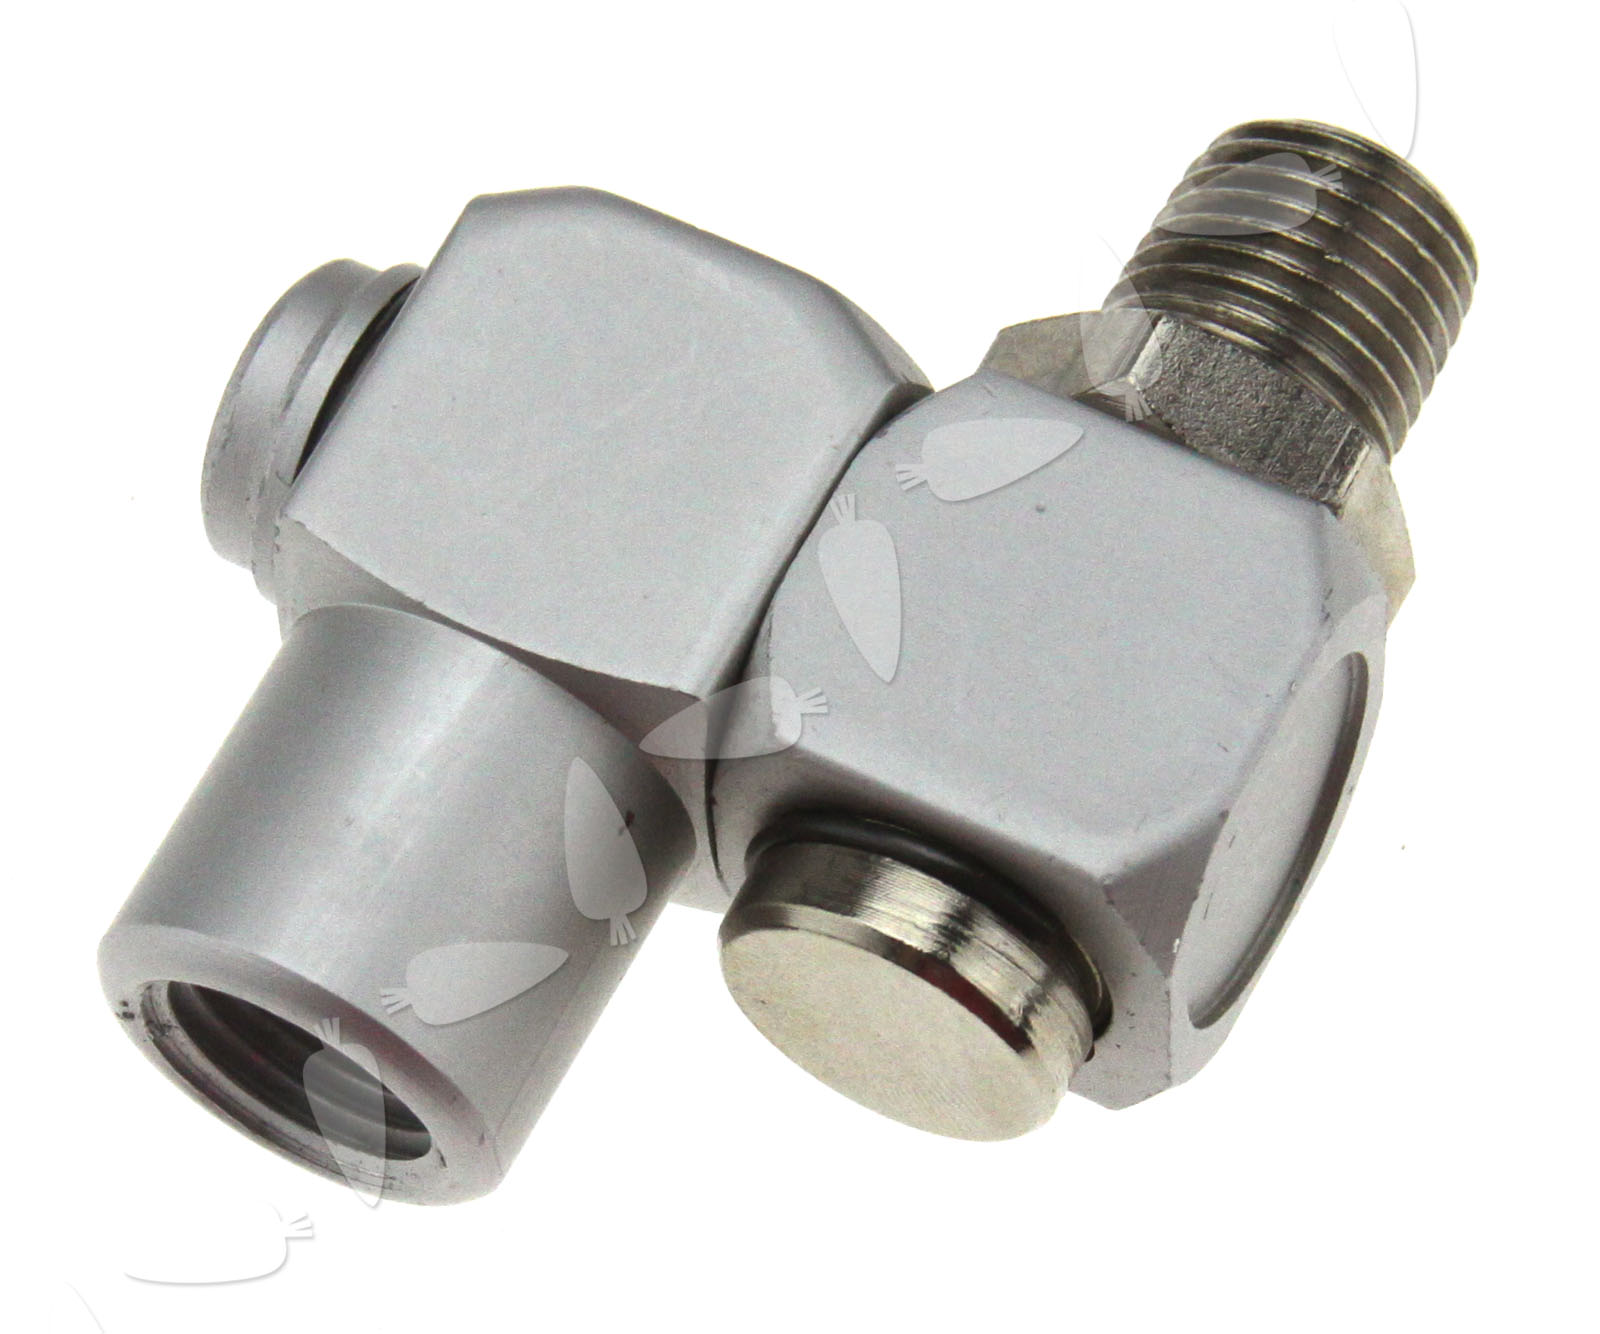 Air Hose Swivel 360 Degree Fitting Connector 1/4